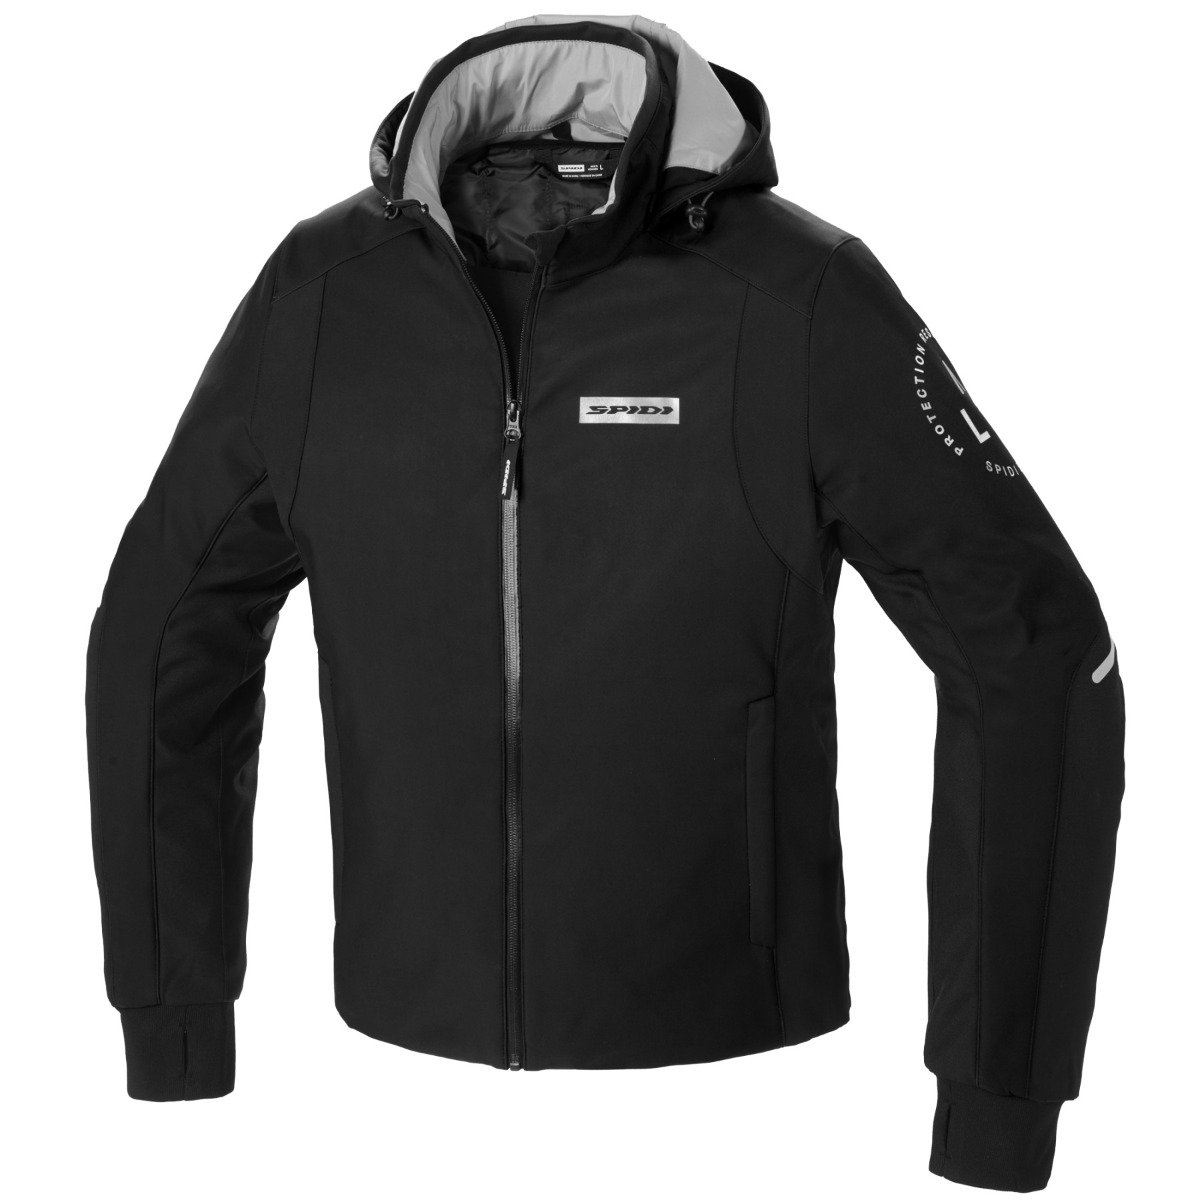 Image of Spidi Armor H2Out Jacket Black White Size S ID 8030161442199